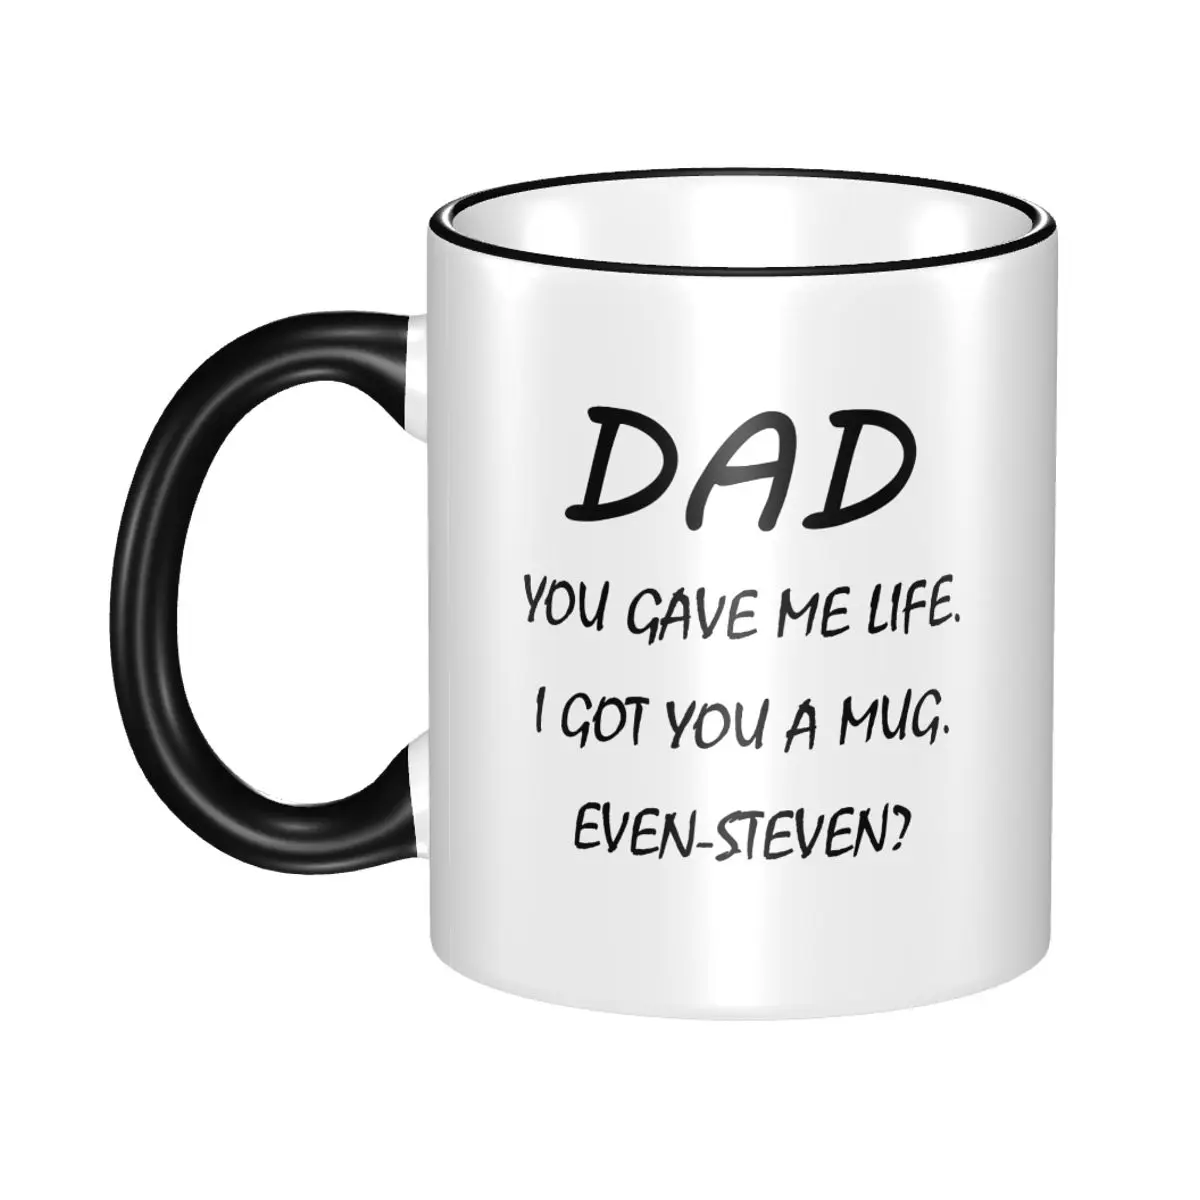 

Ceramic Coffee Mugs Tea Cup Fathers Day Dad Gifts From Daughter, Son - I Got You A Mug Funny Funny and Unique Ceramic Cups Mug